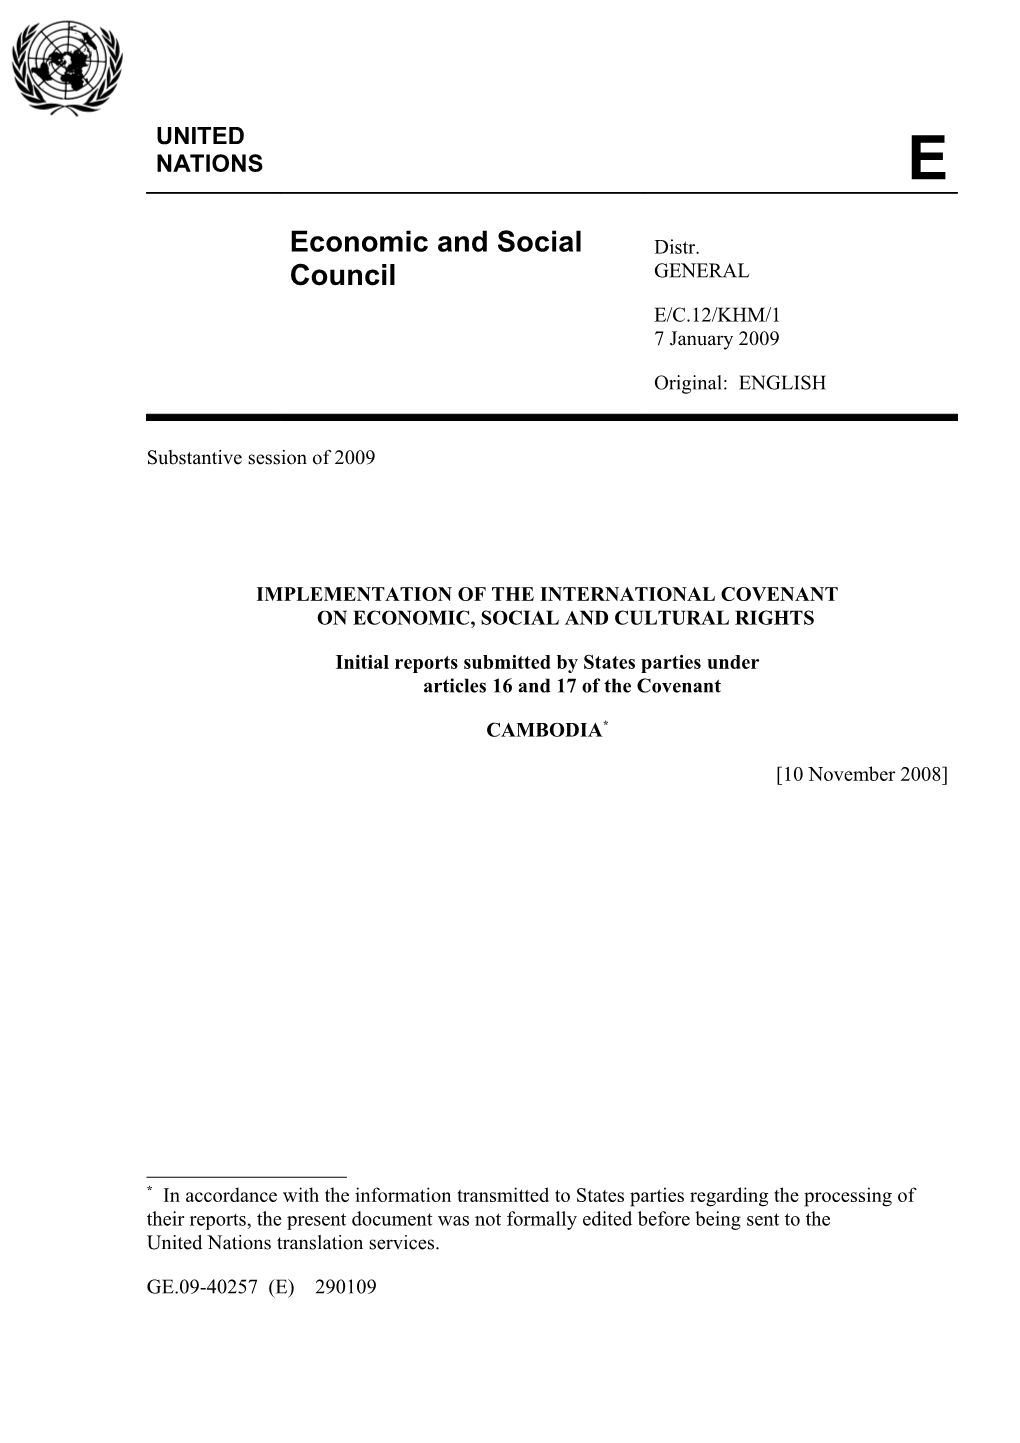 Implementation of the International Covenanton Economic, Social and Cultural Rights s4